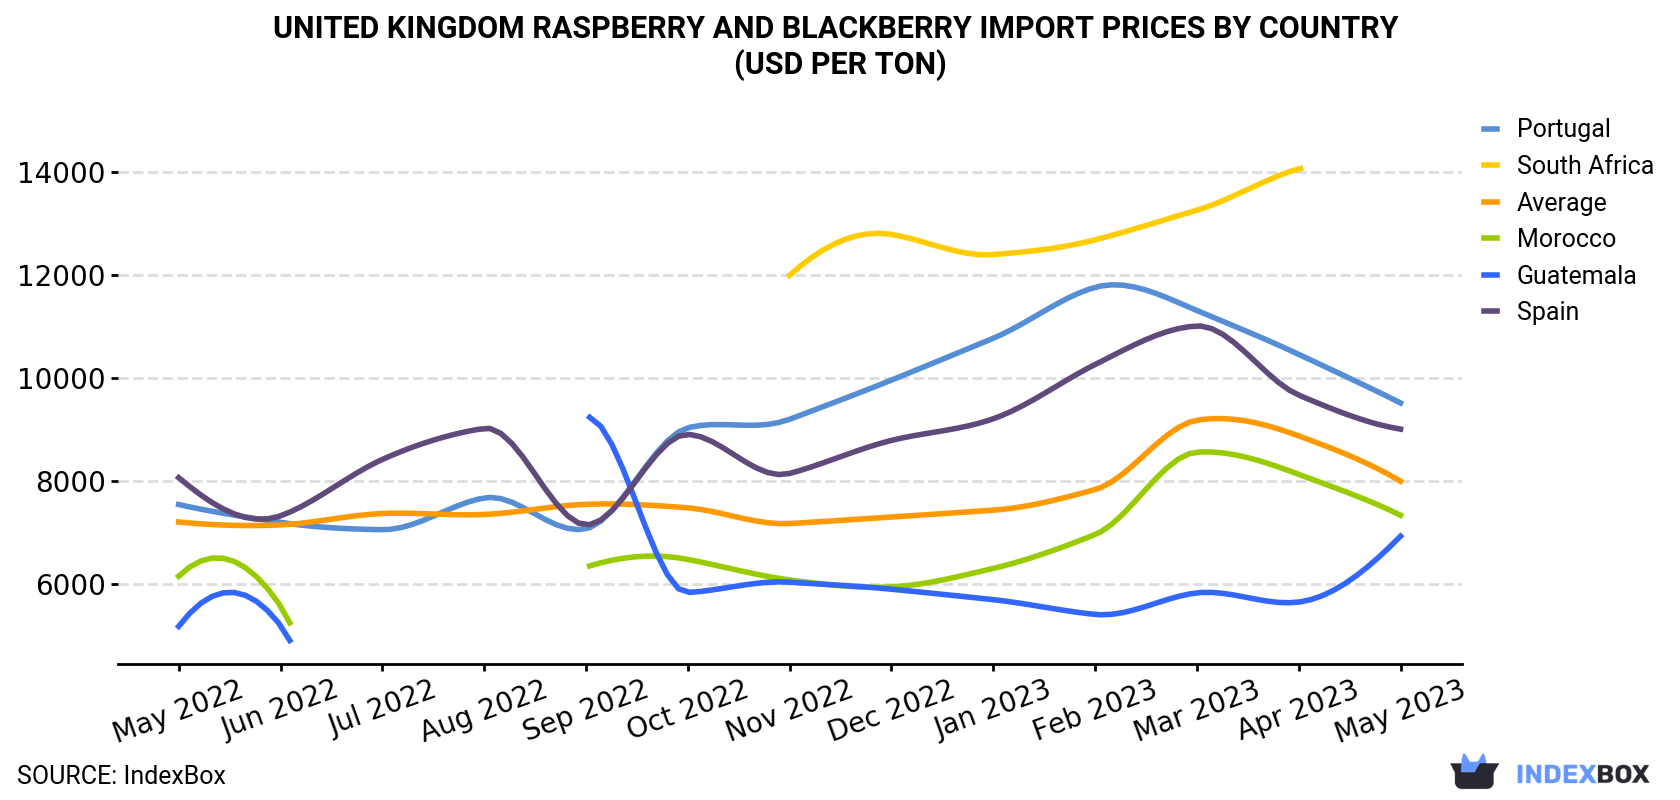 United Kingdom Raspberry And Blackberry Import Prices By Country (USD Per Ton)